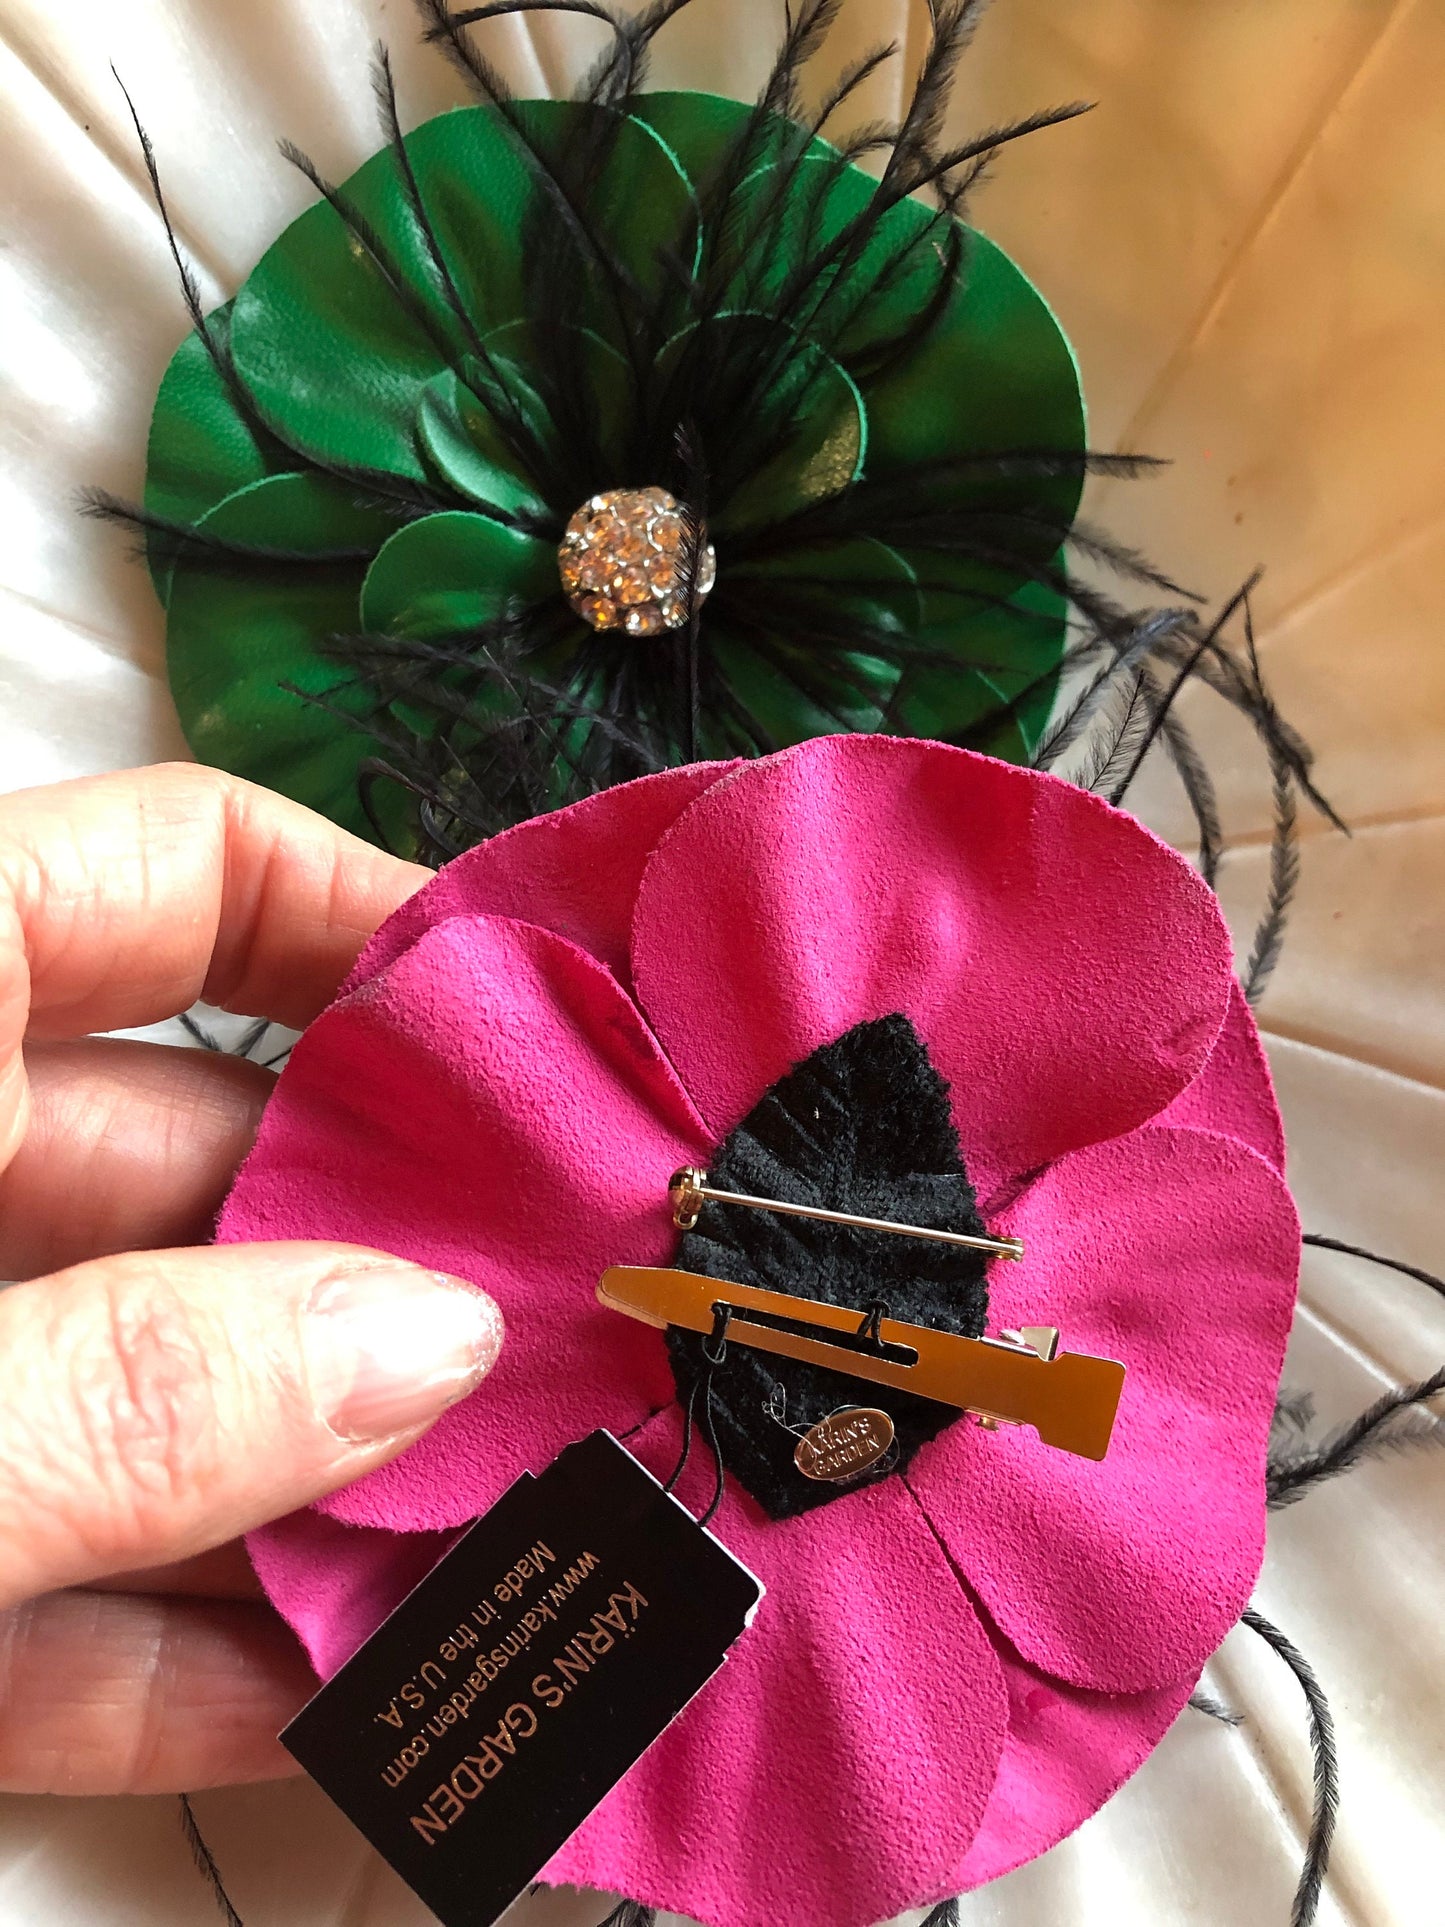 Karin's Garden 4" Leather Camellia Pin and Pinch Clip.   Feathers and rhinestones in the center.  Handmade in the USA.